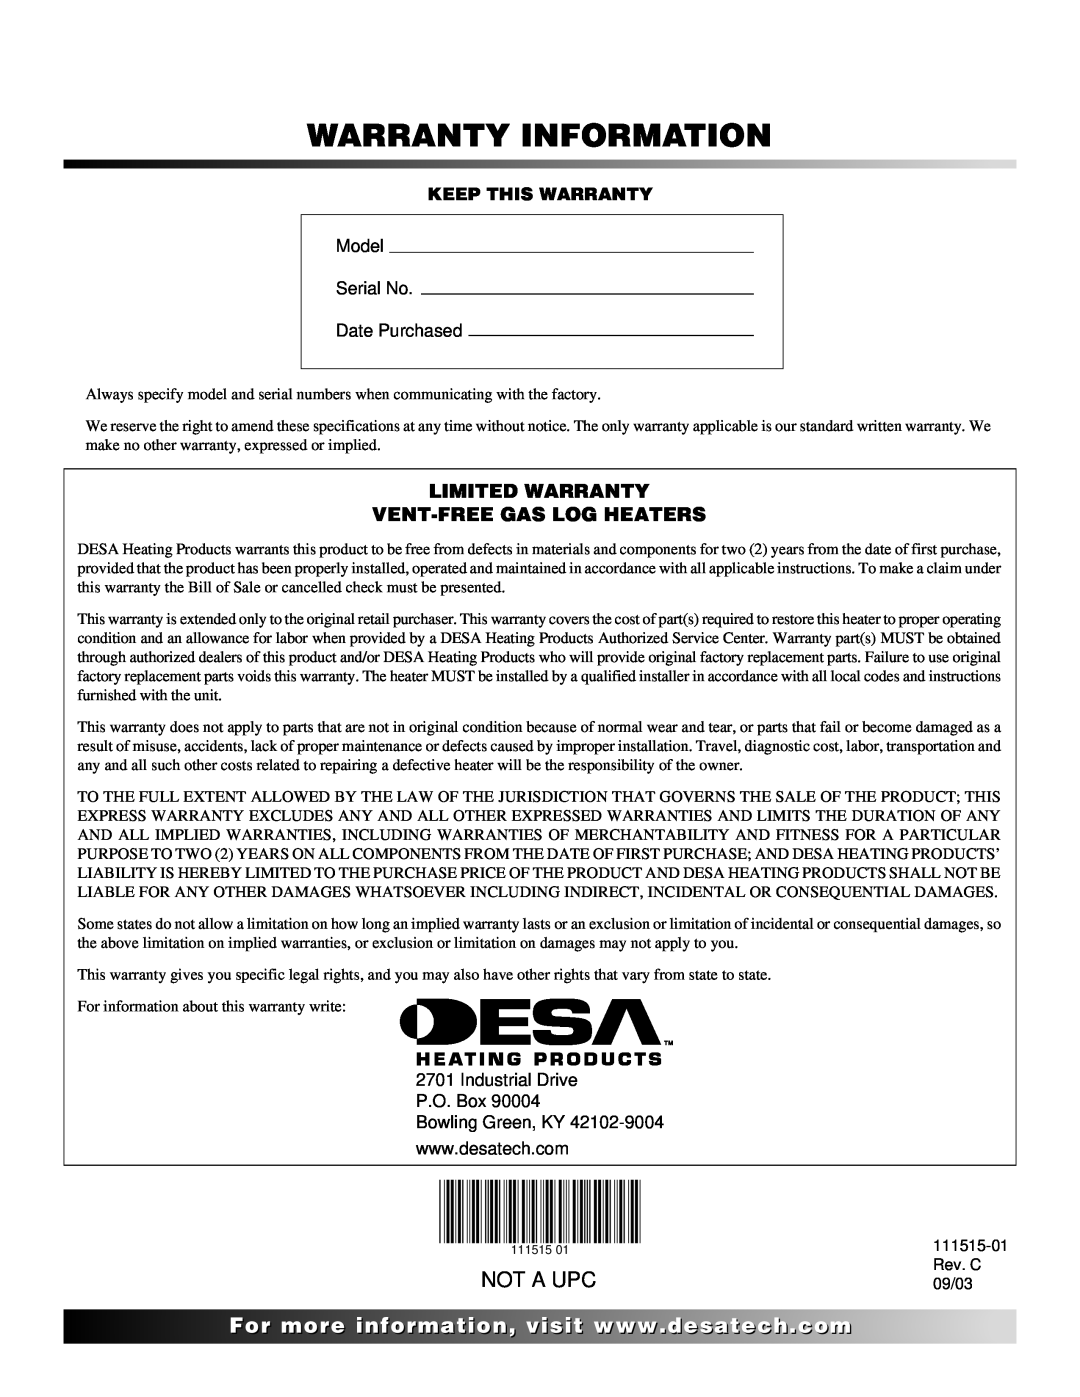 Desa LDL3930NR Warranty Information, Not A Upc, Limited Warranty Vent-Freegas Log Heaters, Model Serial No Date Purchased 